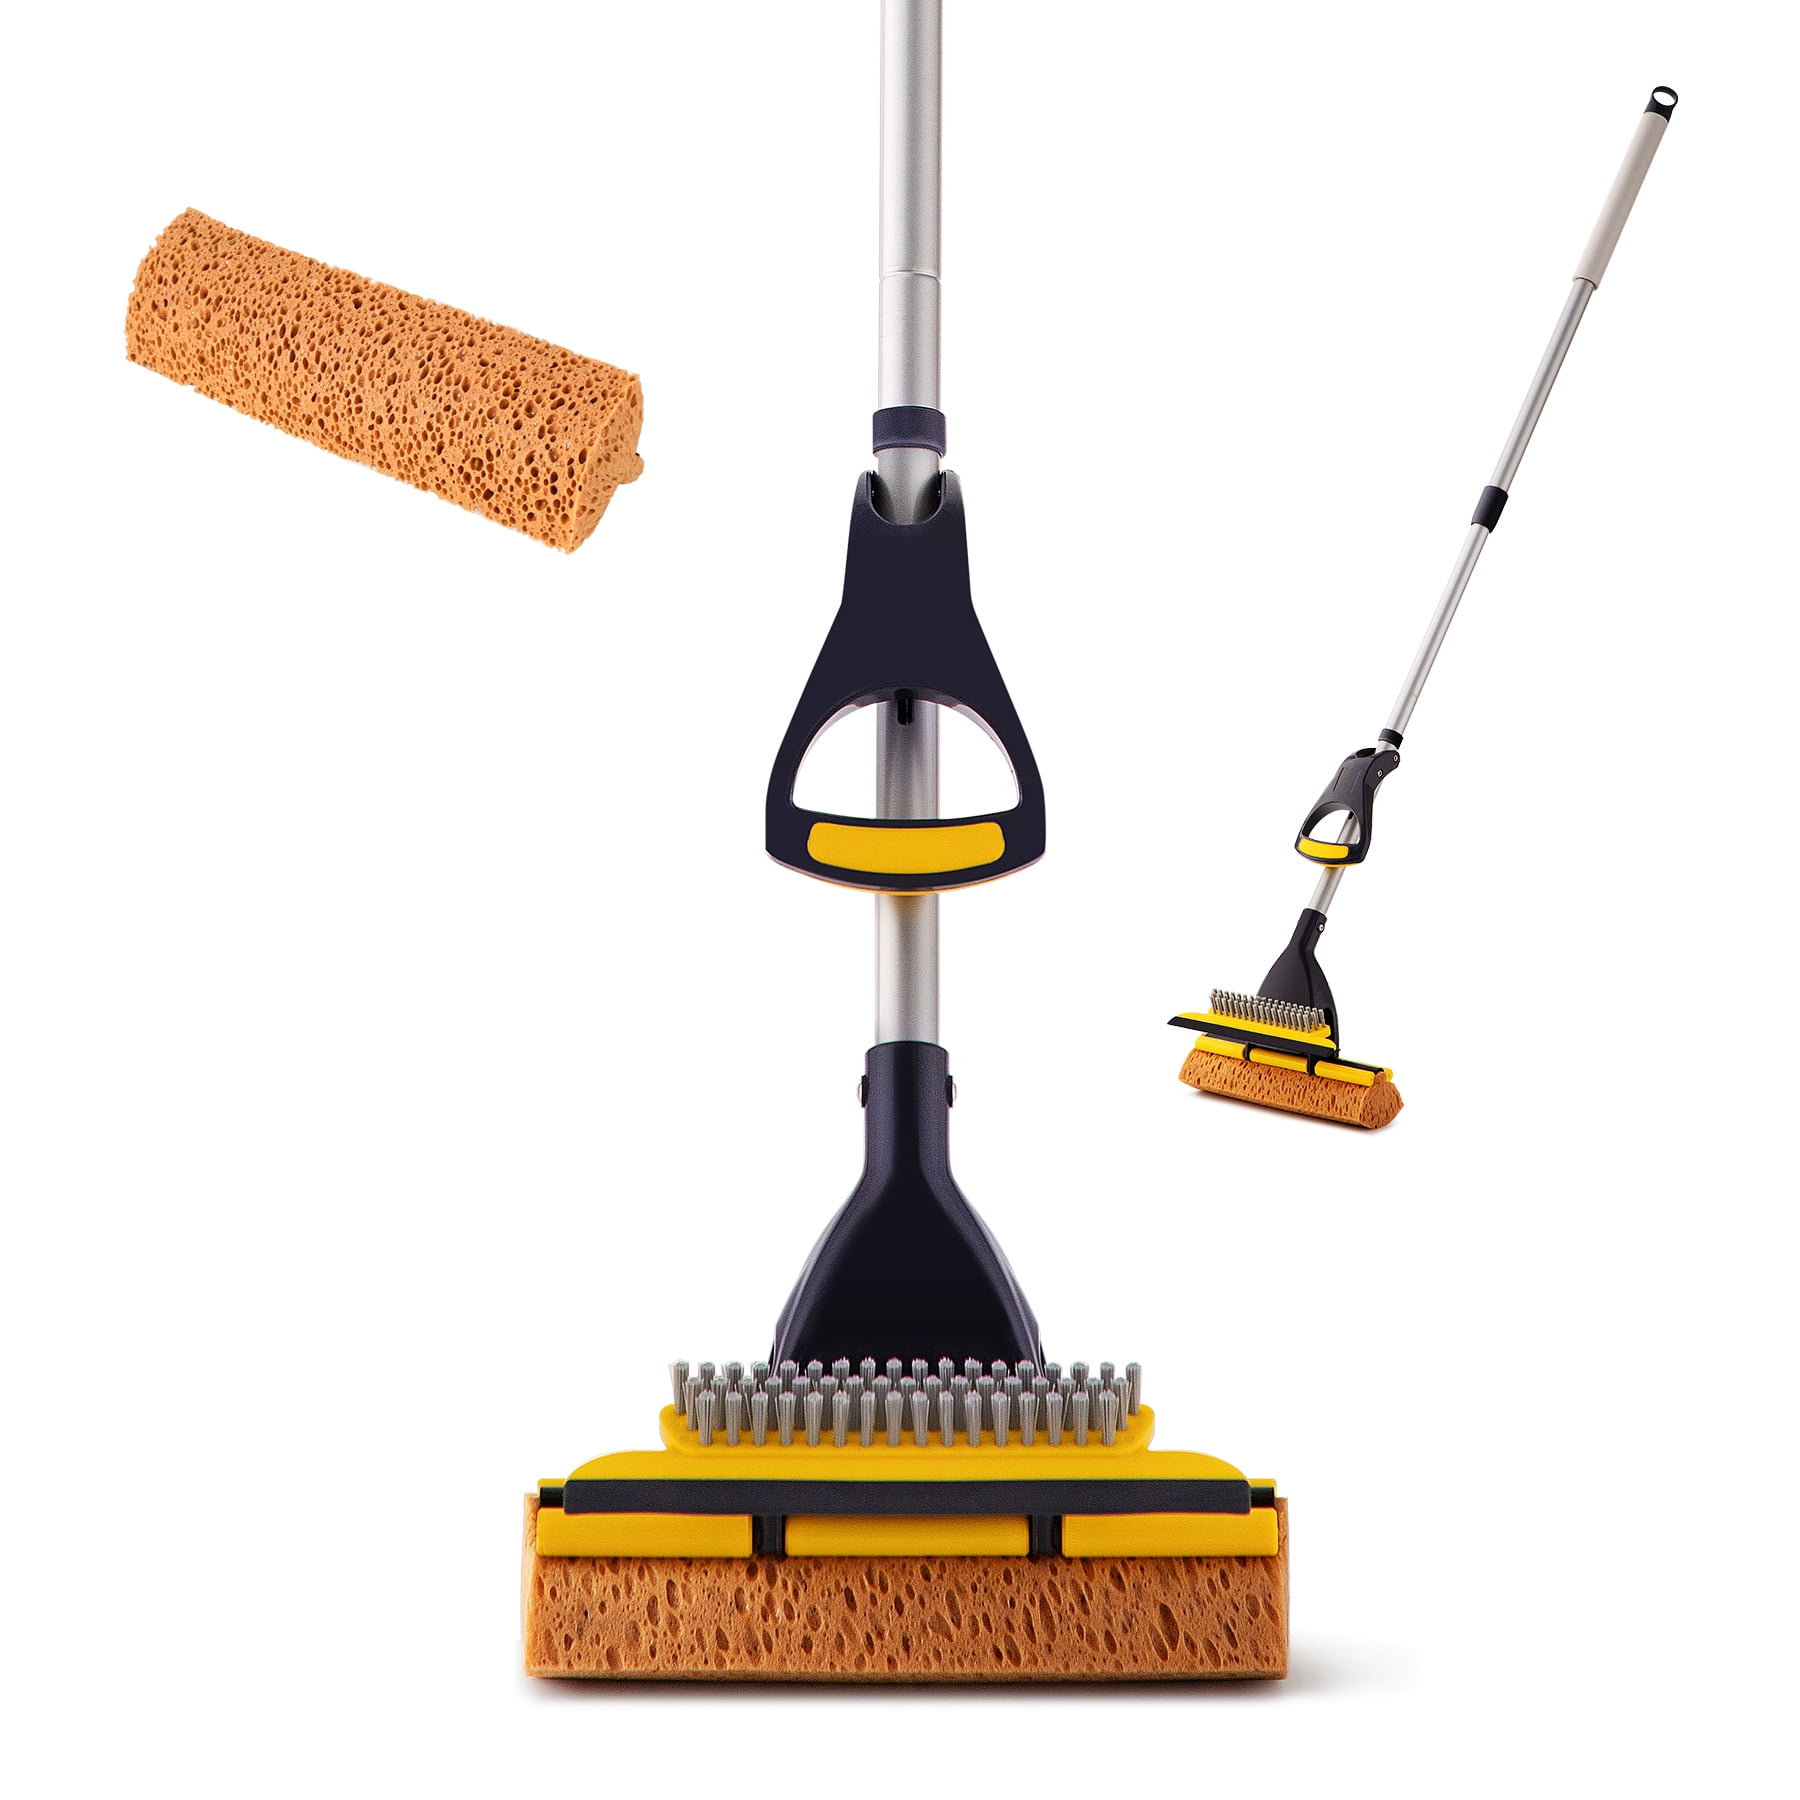 Yocada Sponge Mop Home Commercial Use Tile Floor Bathroom Garage Cleaning  with Total 2 Sponge Heads Squeegee and Extendable Telescopic Long Handle